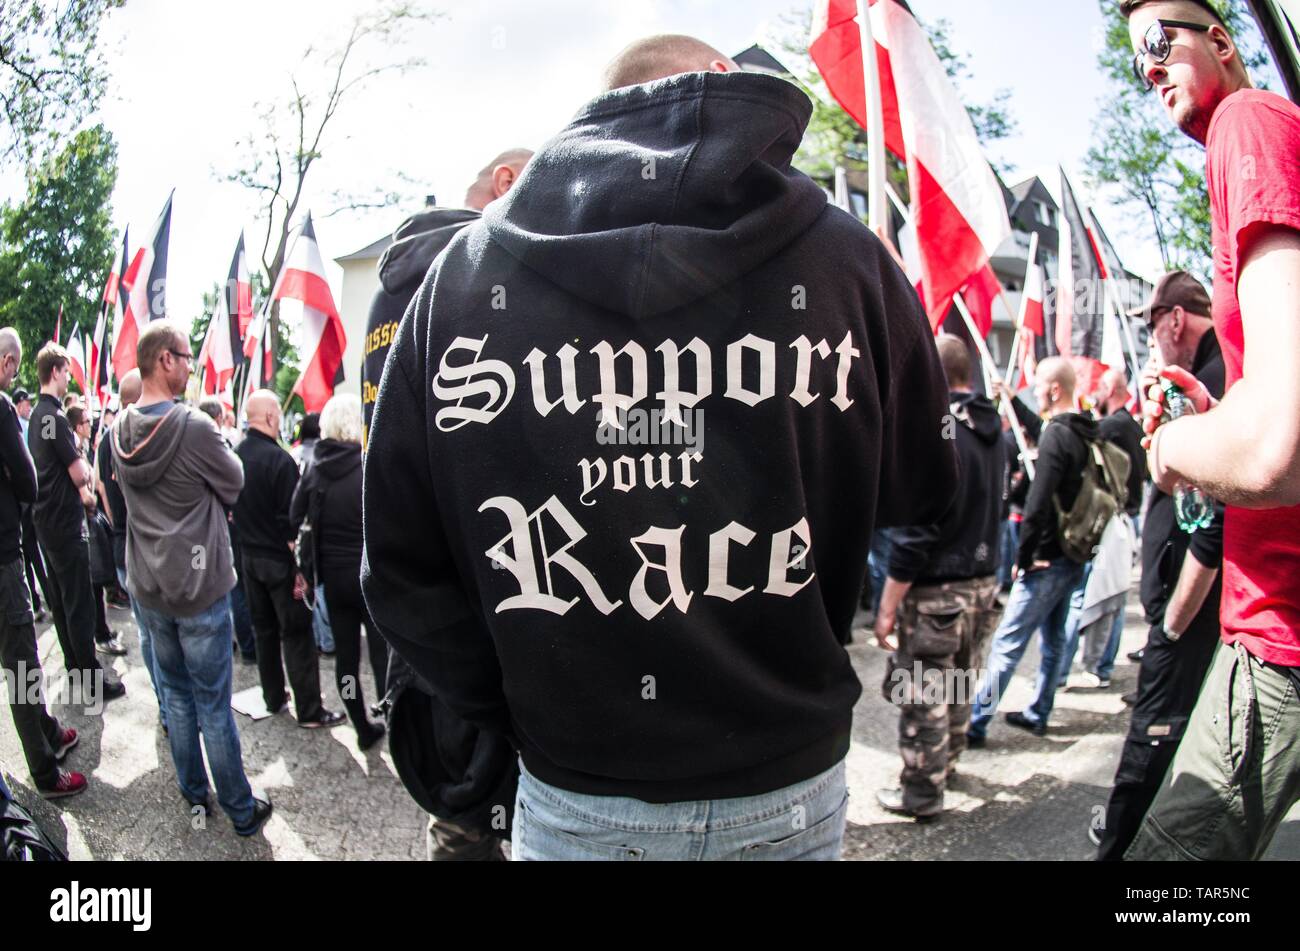 Dortmund, Nordrhein Westfalen, Germany. 25th May, 2019. ''Support your race'' worn by a neonazi at an event in Dortmund, Germany. Prior to the European Elections, the neonazi party Die Rechte (The Right) organized a rally in the German city of Dortmund to promote their candidate, the incarcerated Holocaust denier Ursula Haverbeck. The demonstration and march were organized by prominent local political figure and neonazi activist Michael Brueck (Michael BrÃ¼ck) who enlisted the help of not only German neonazis, but also assistance from Russian, Bulgarian, Hungarian, and Dutch groups with the Stock Photo